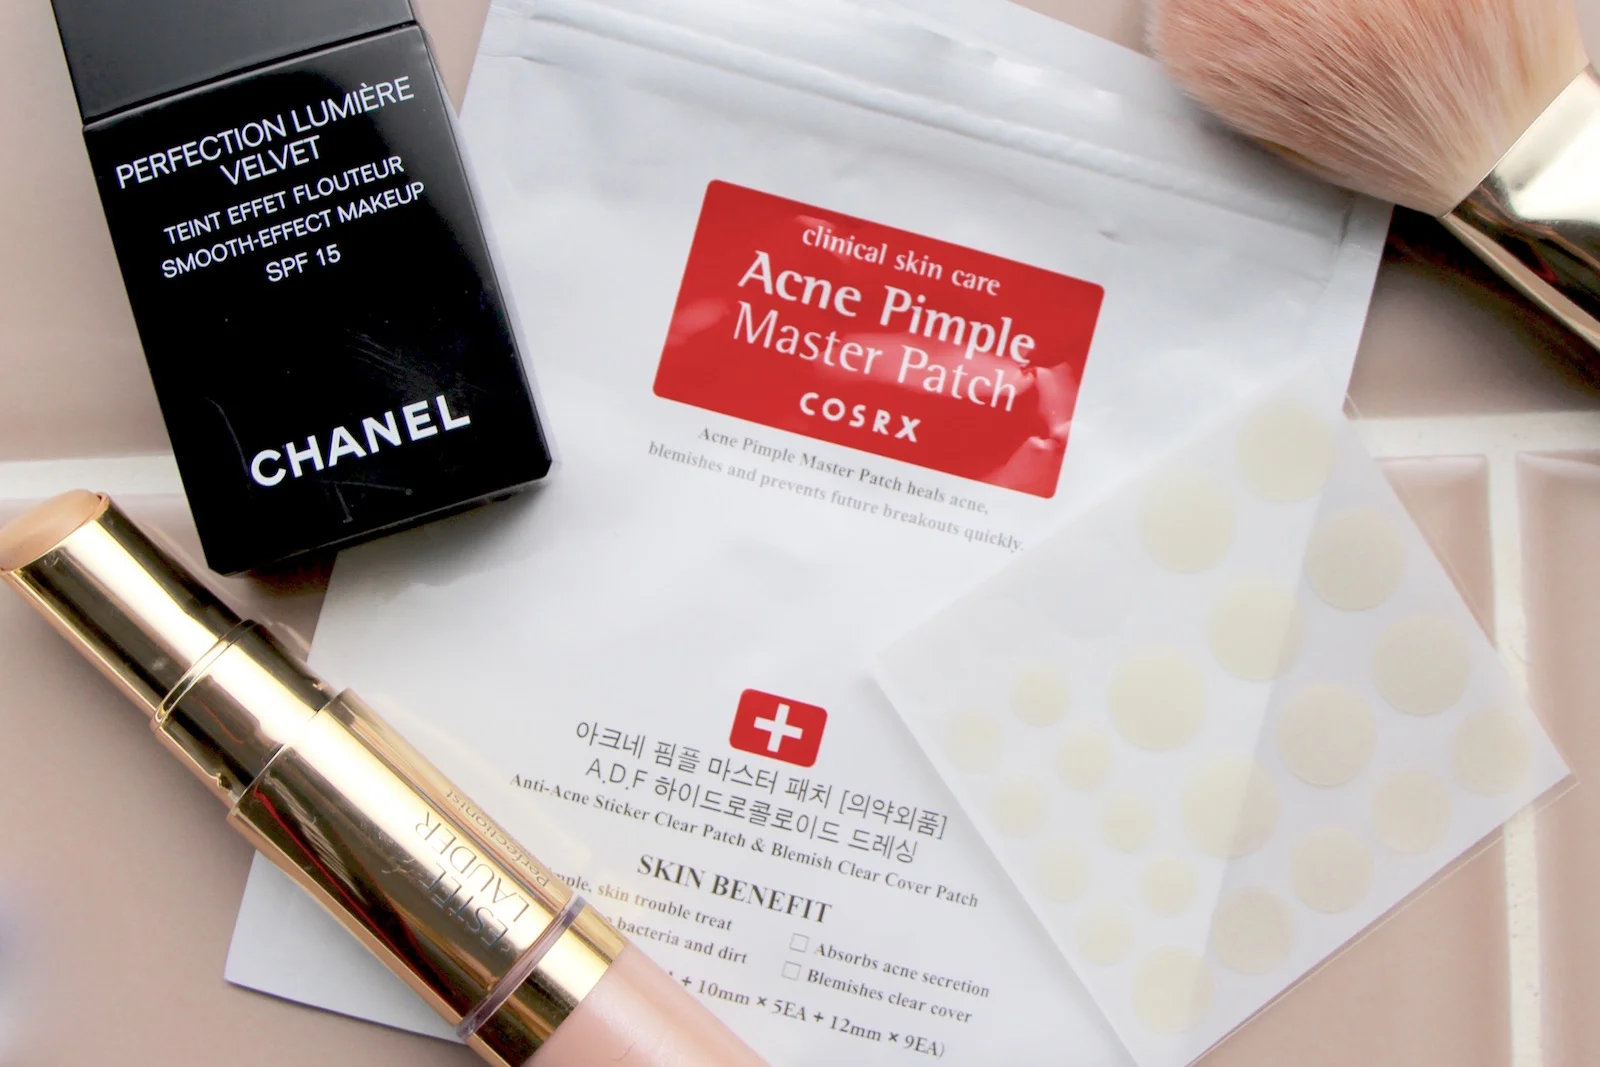 The Magic Pimple Master Patch Review